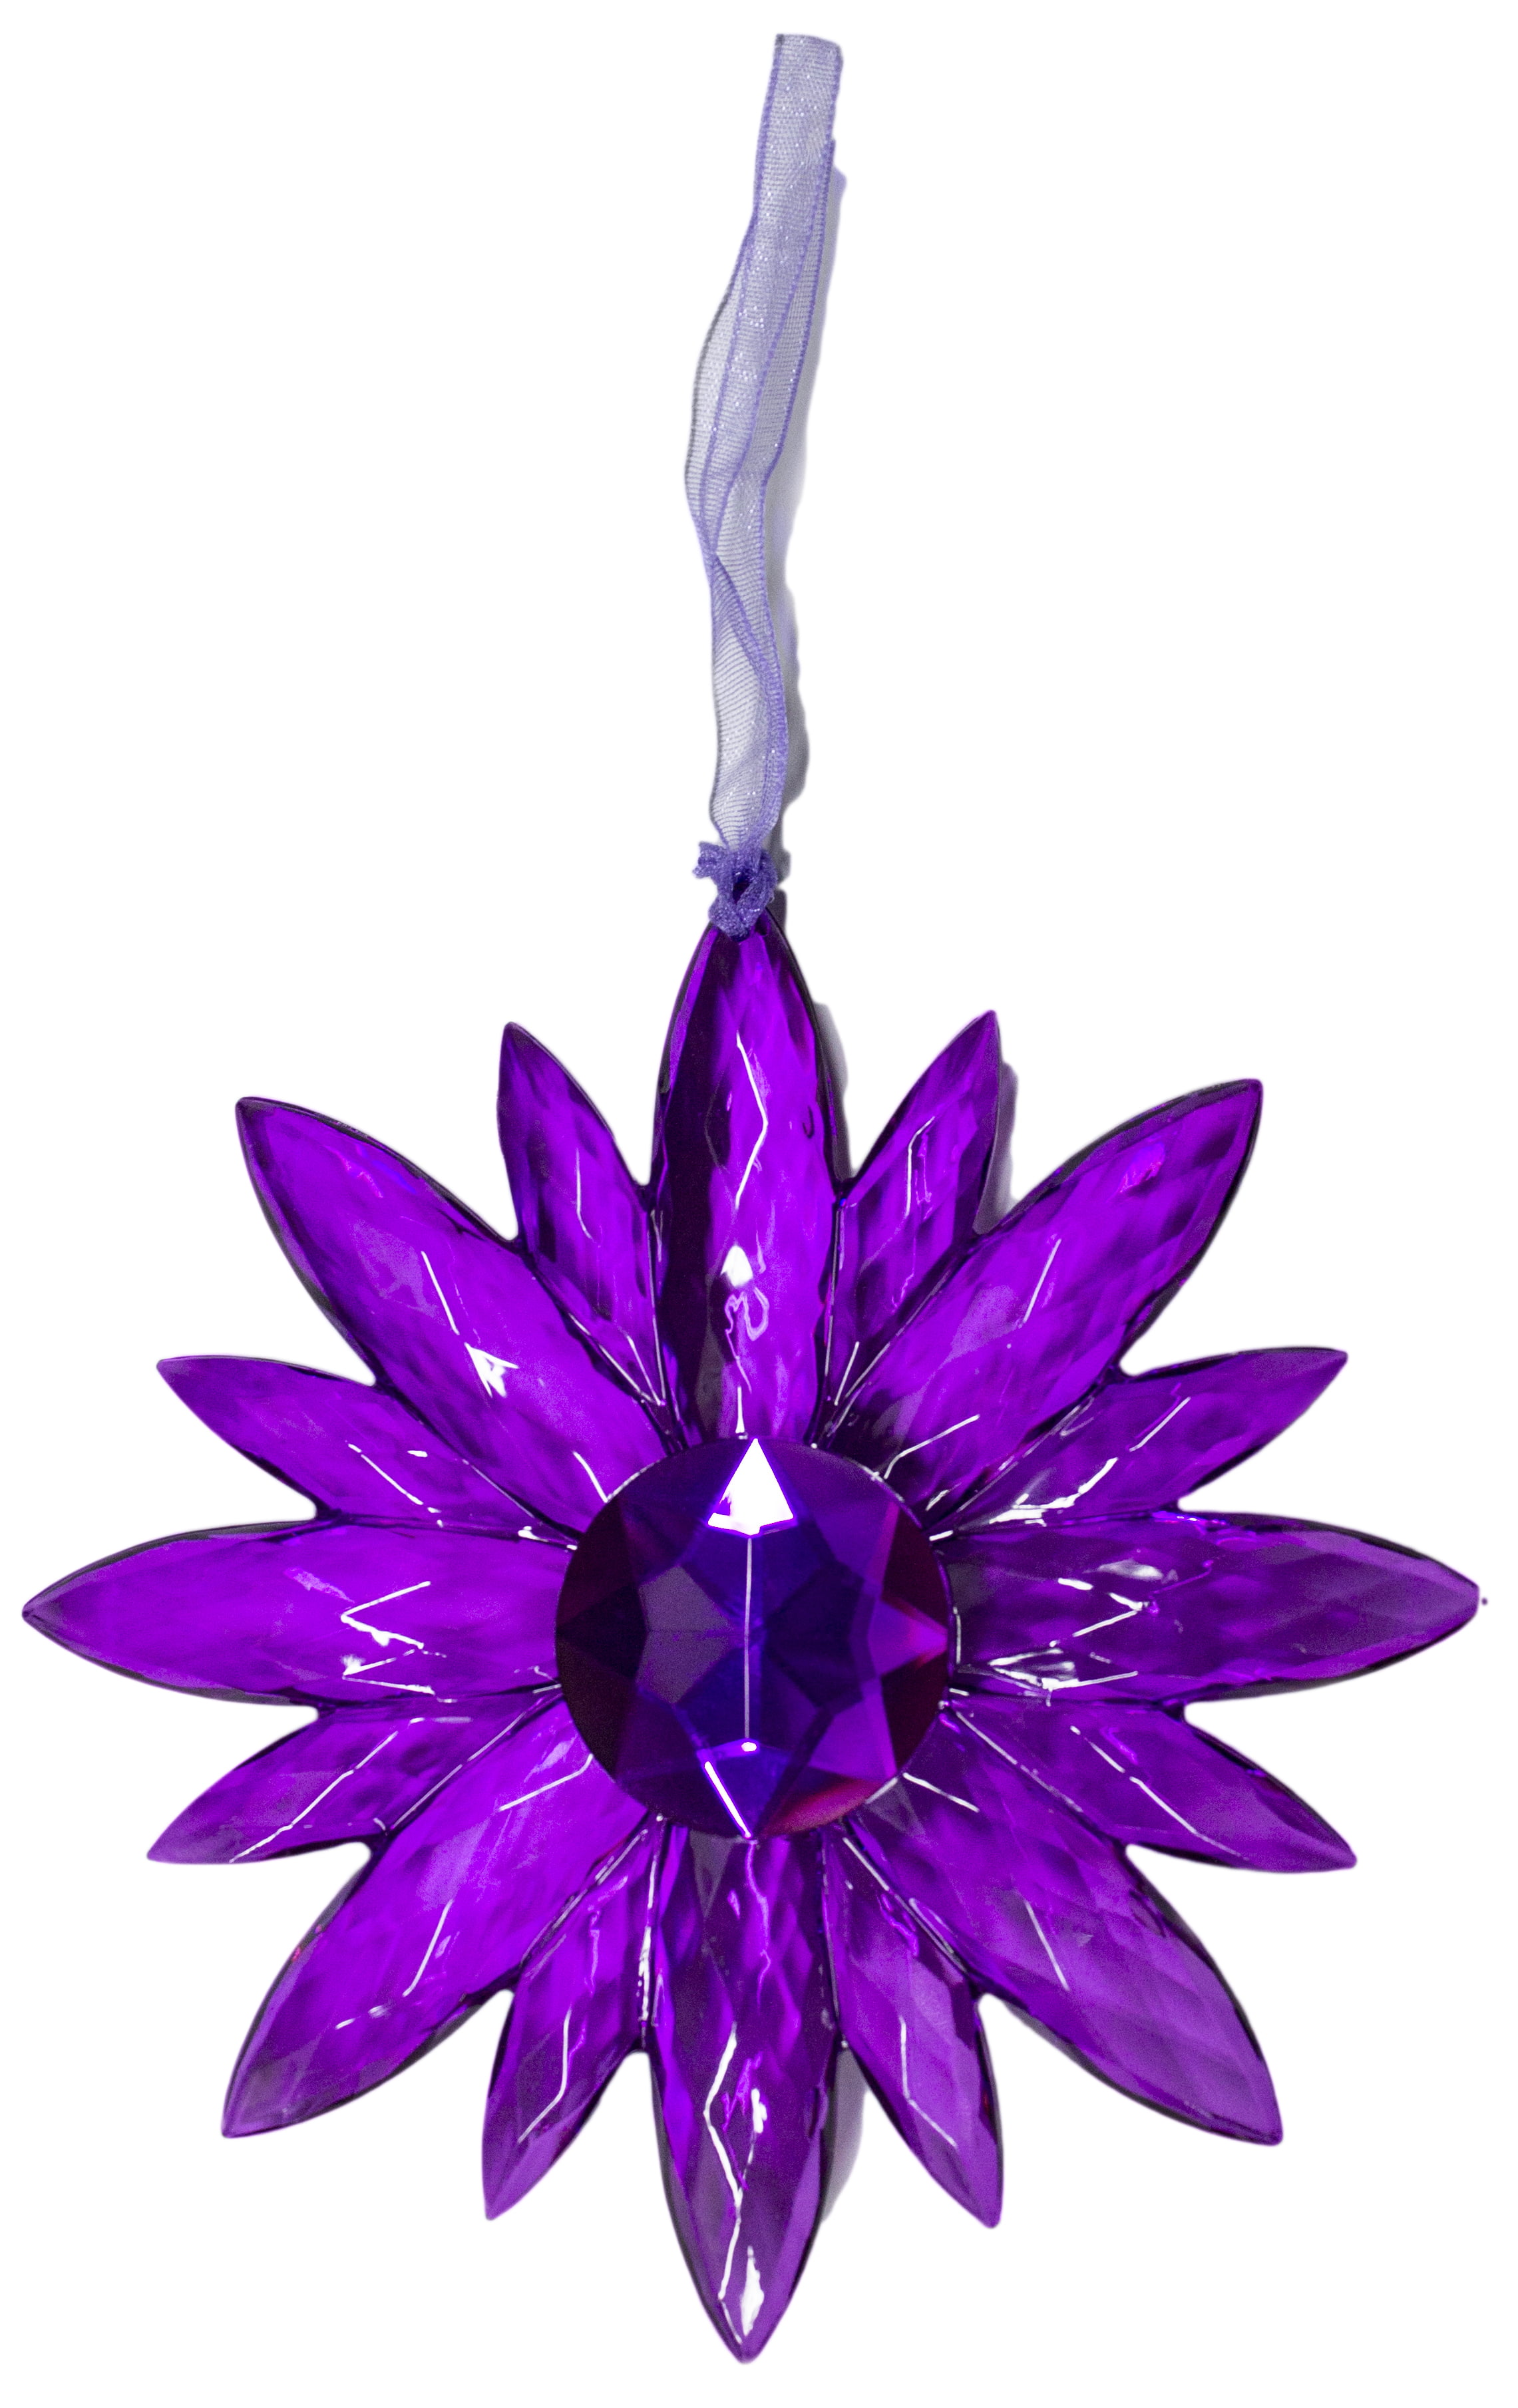 Crystal Expressions Small Jewel Flower Ornament 